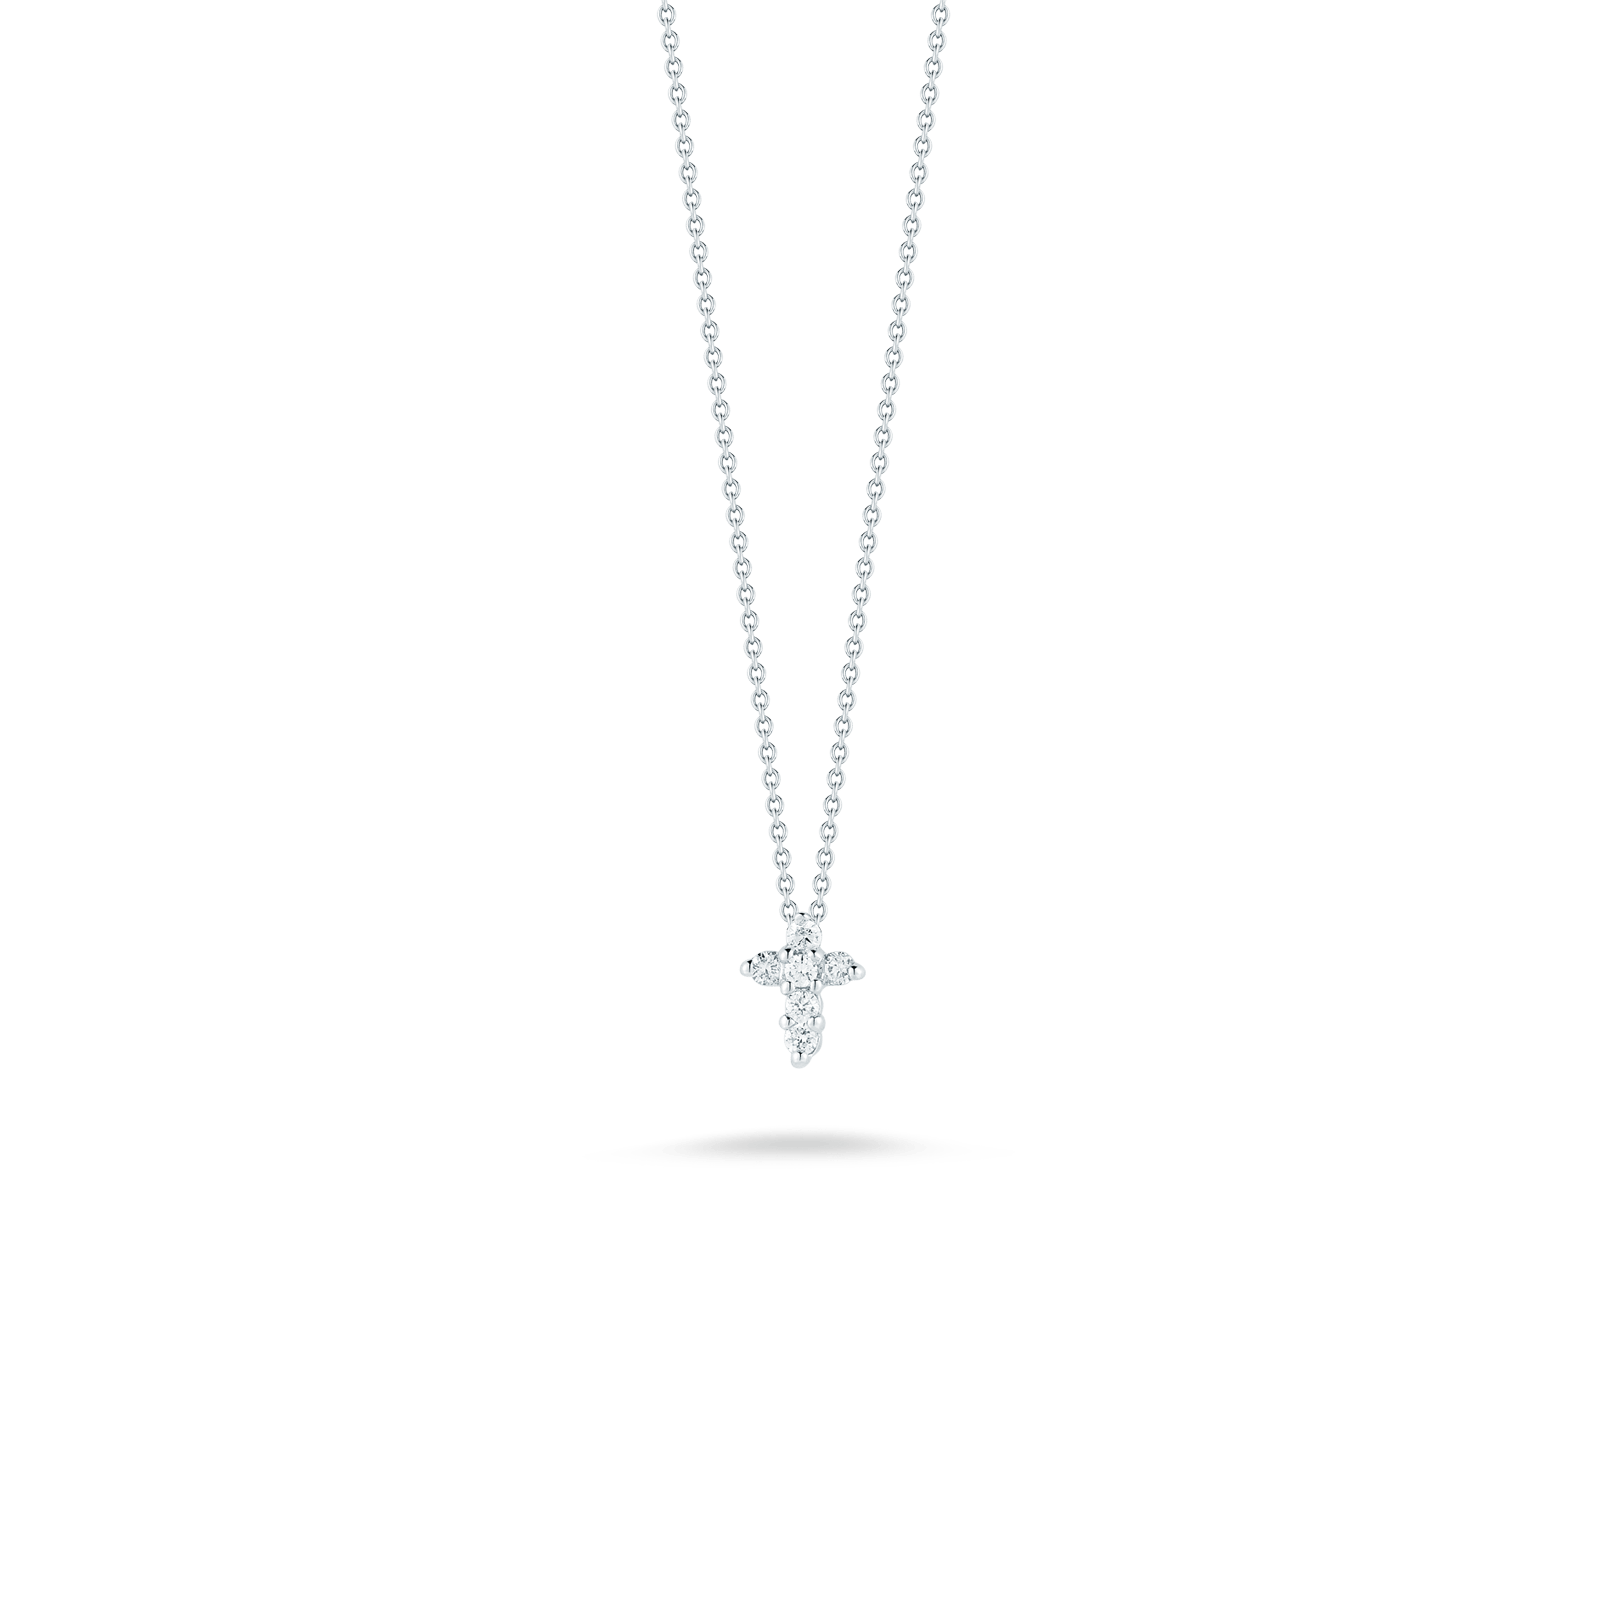 Baby Cross Necklace 18K White Gold with Diamonds